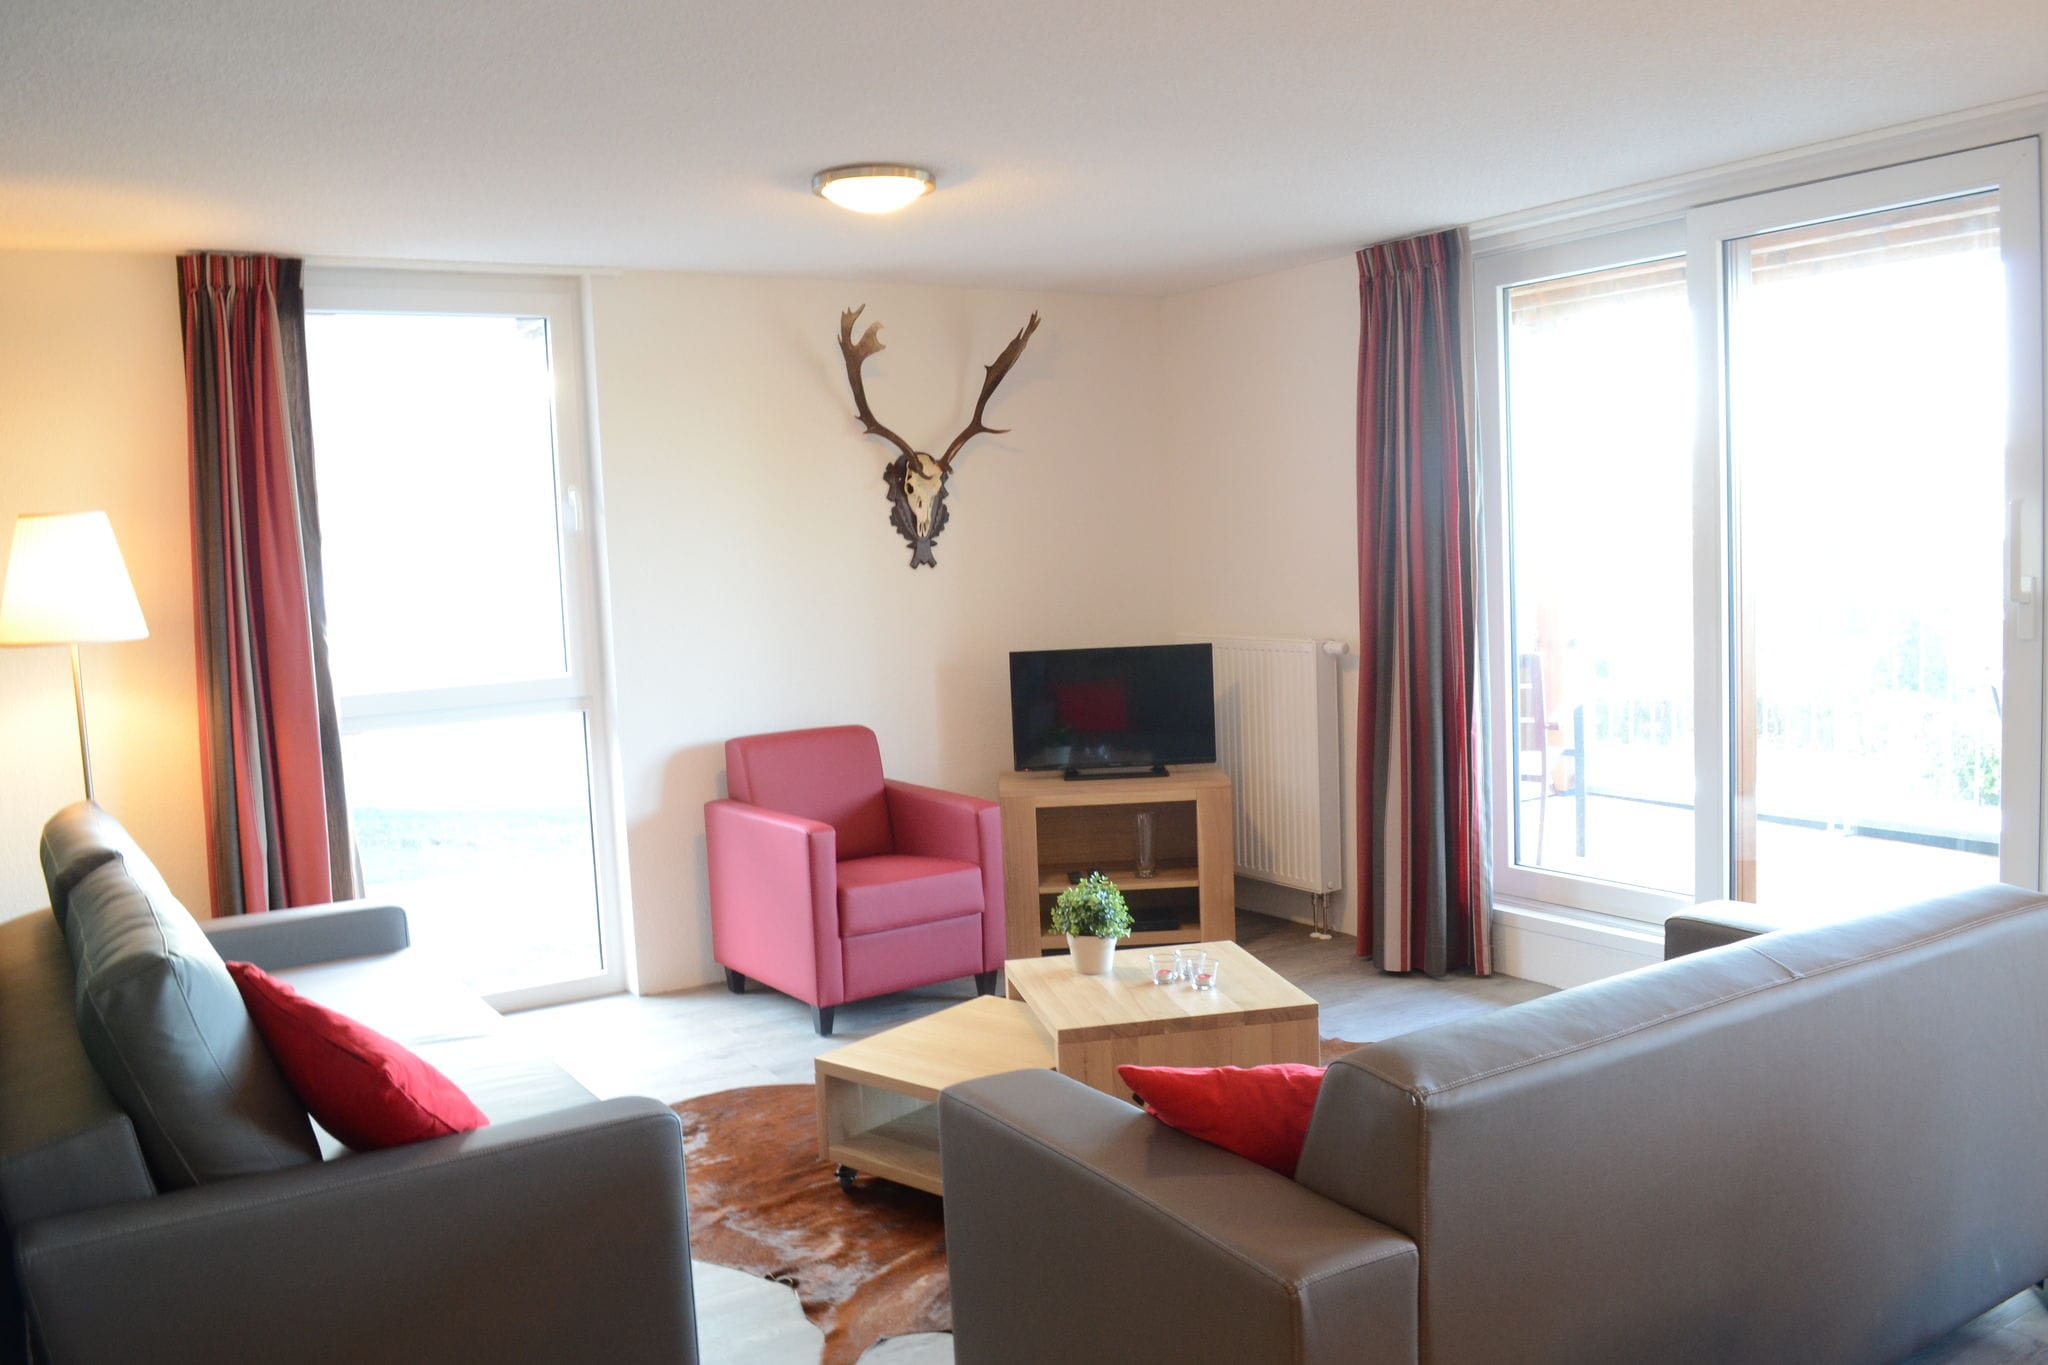 Spacious, modern apartment, ten minutes walk from the centre